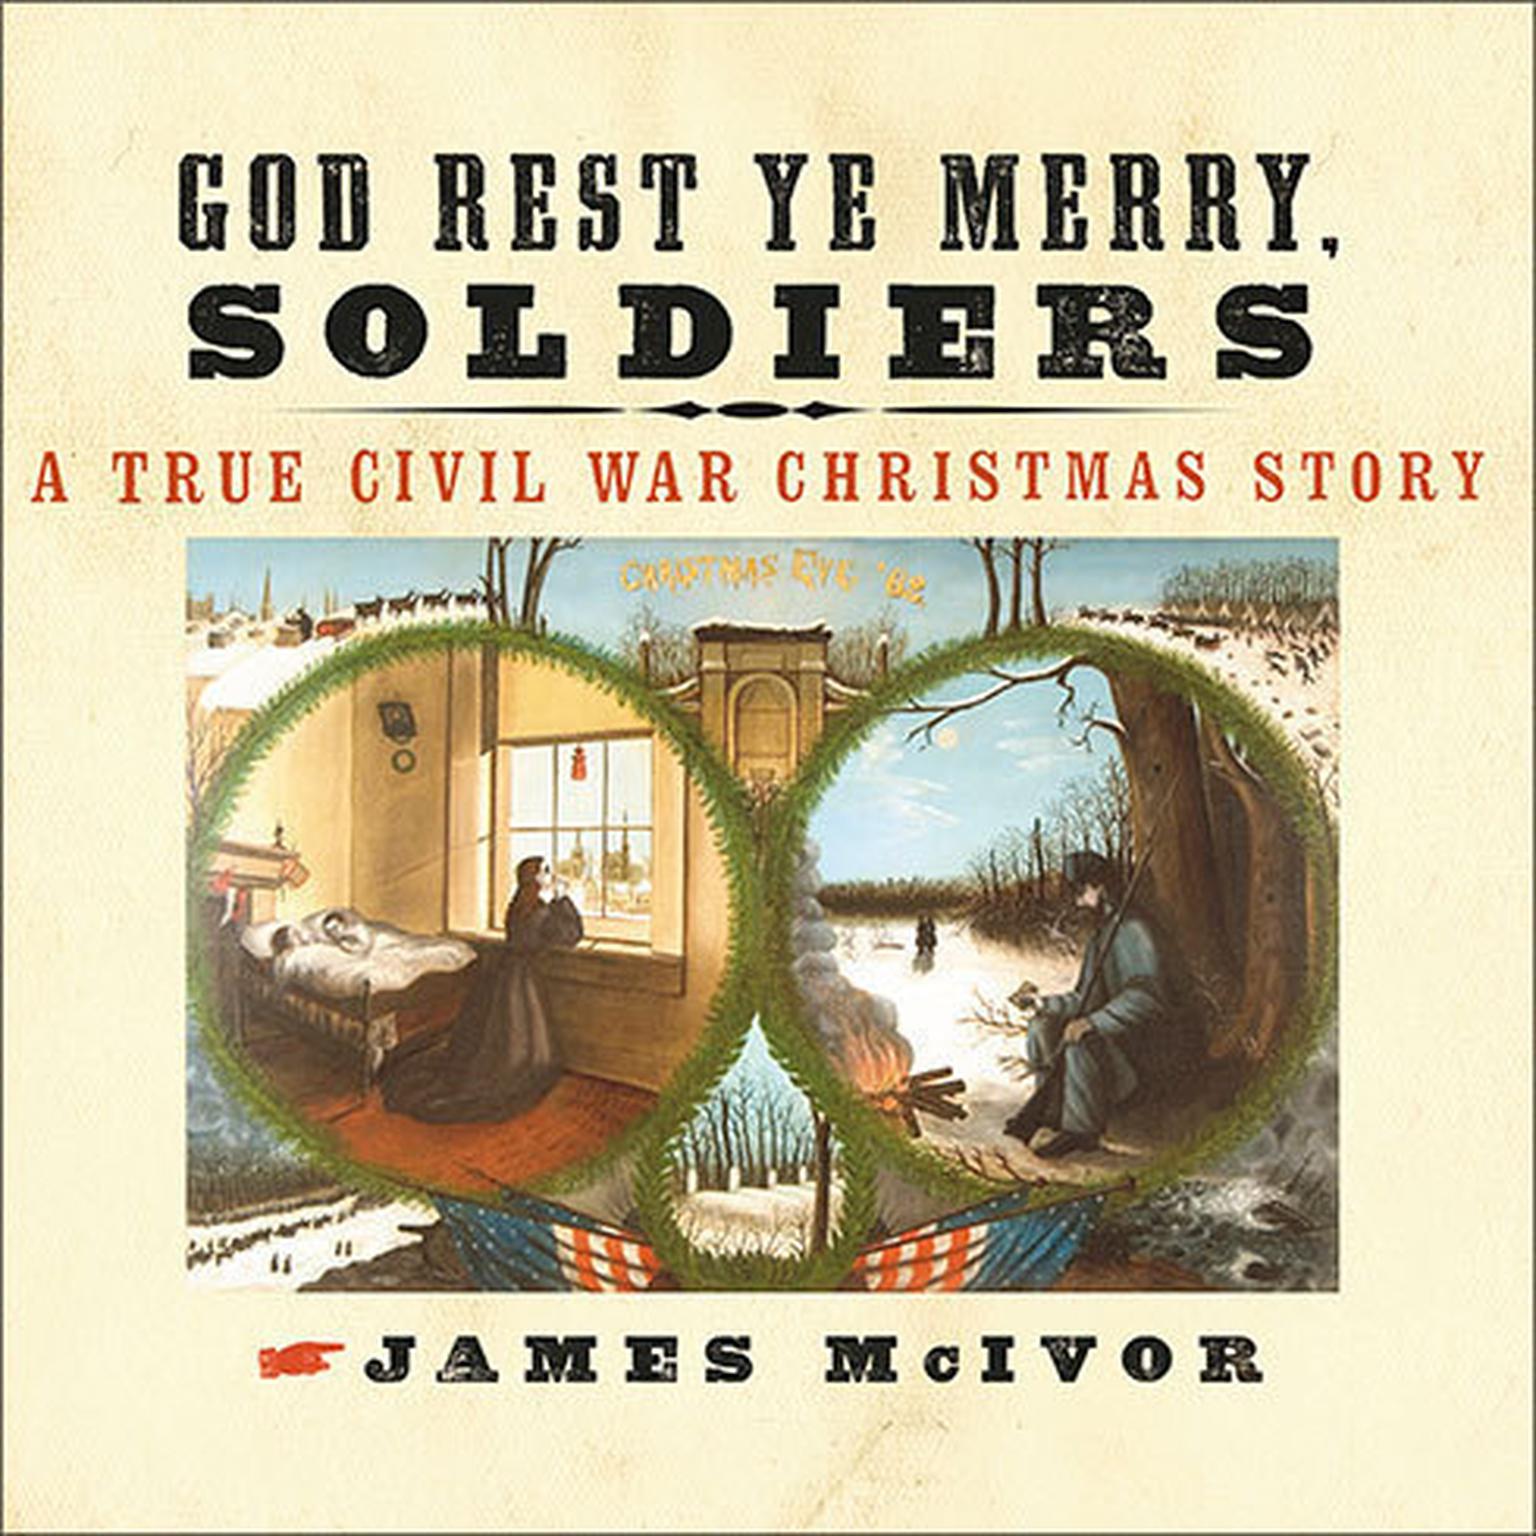 God Rest Ye Merry, Soldiers: A True Civil War Christmas Story Audiobook, by James McIvor